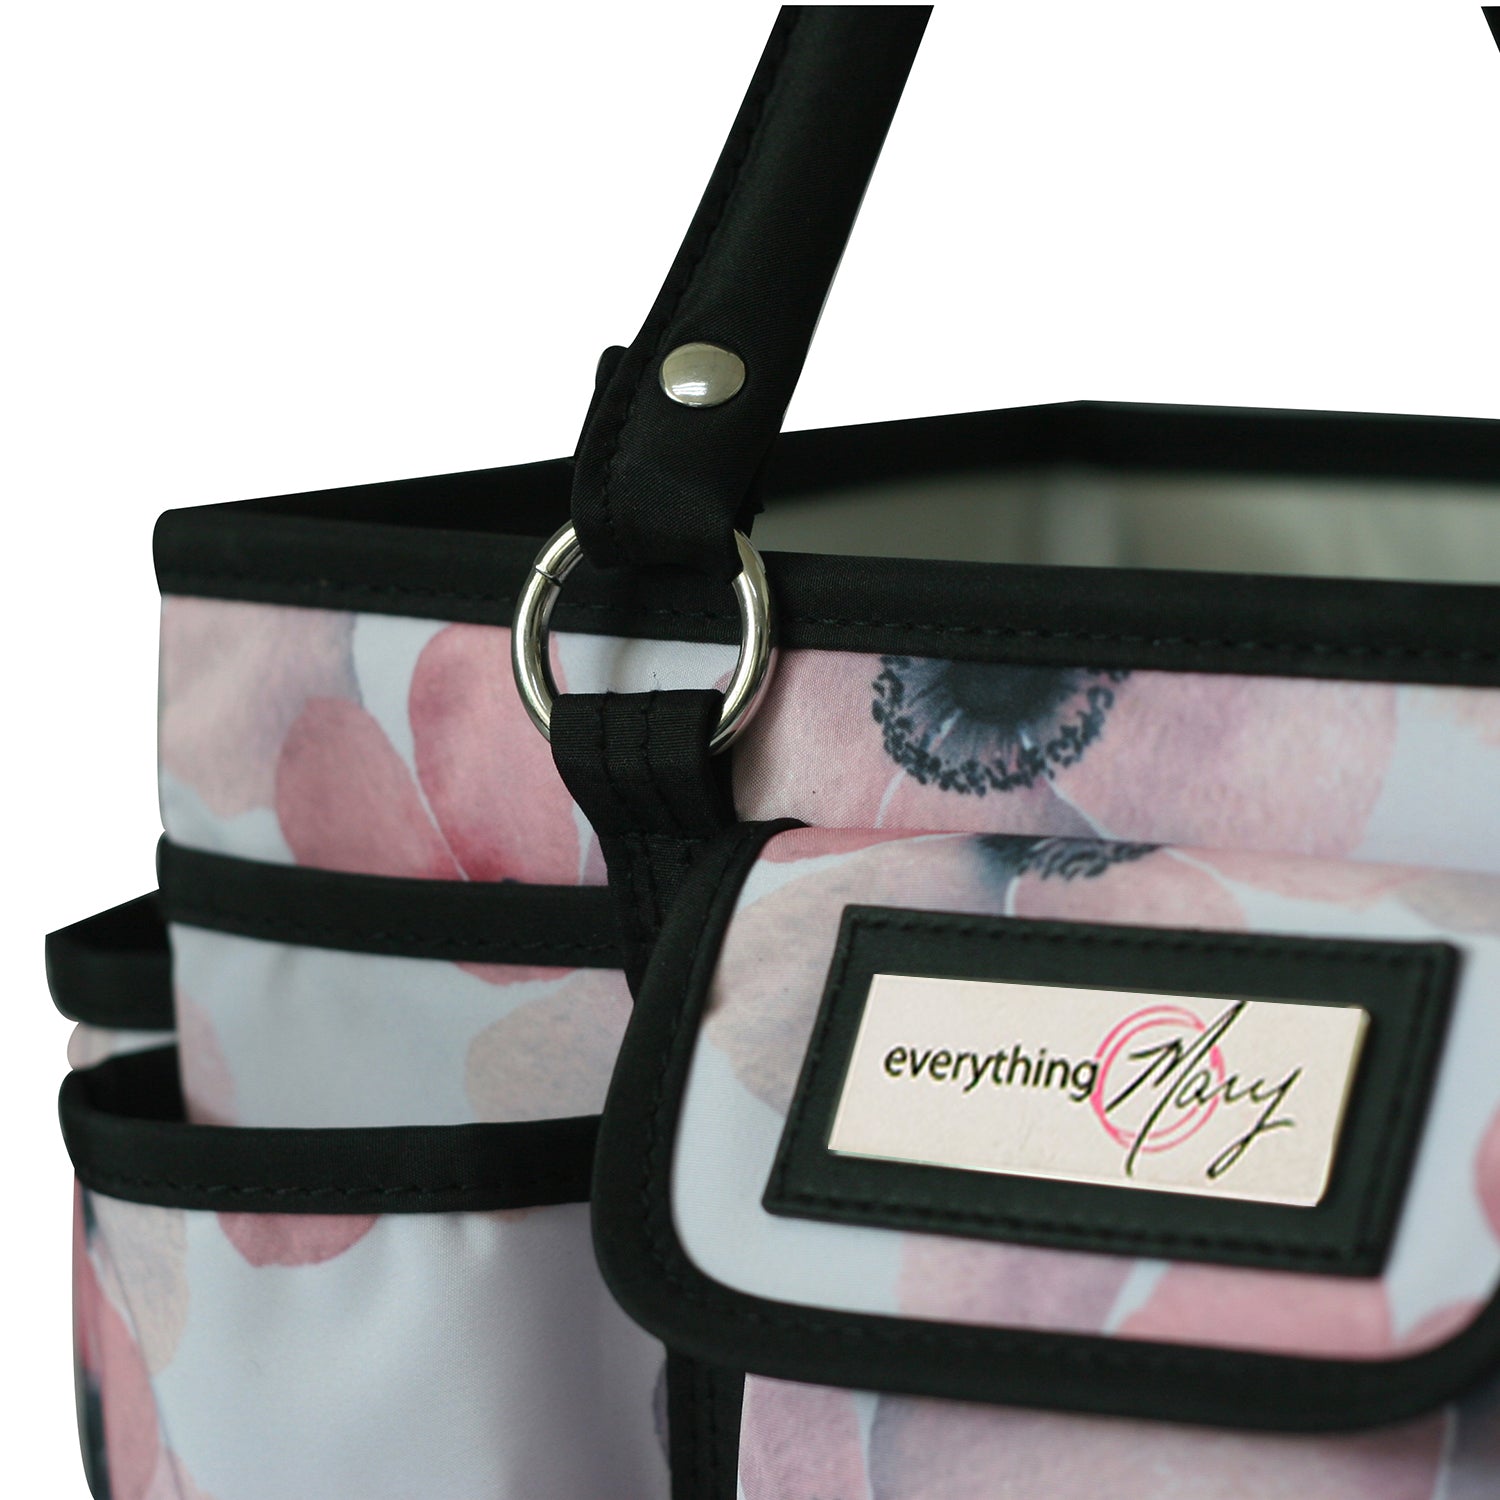 Deluxe Store & Tote Craft Organizer, White & Floral - Everything Mary